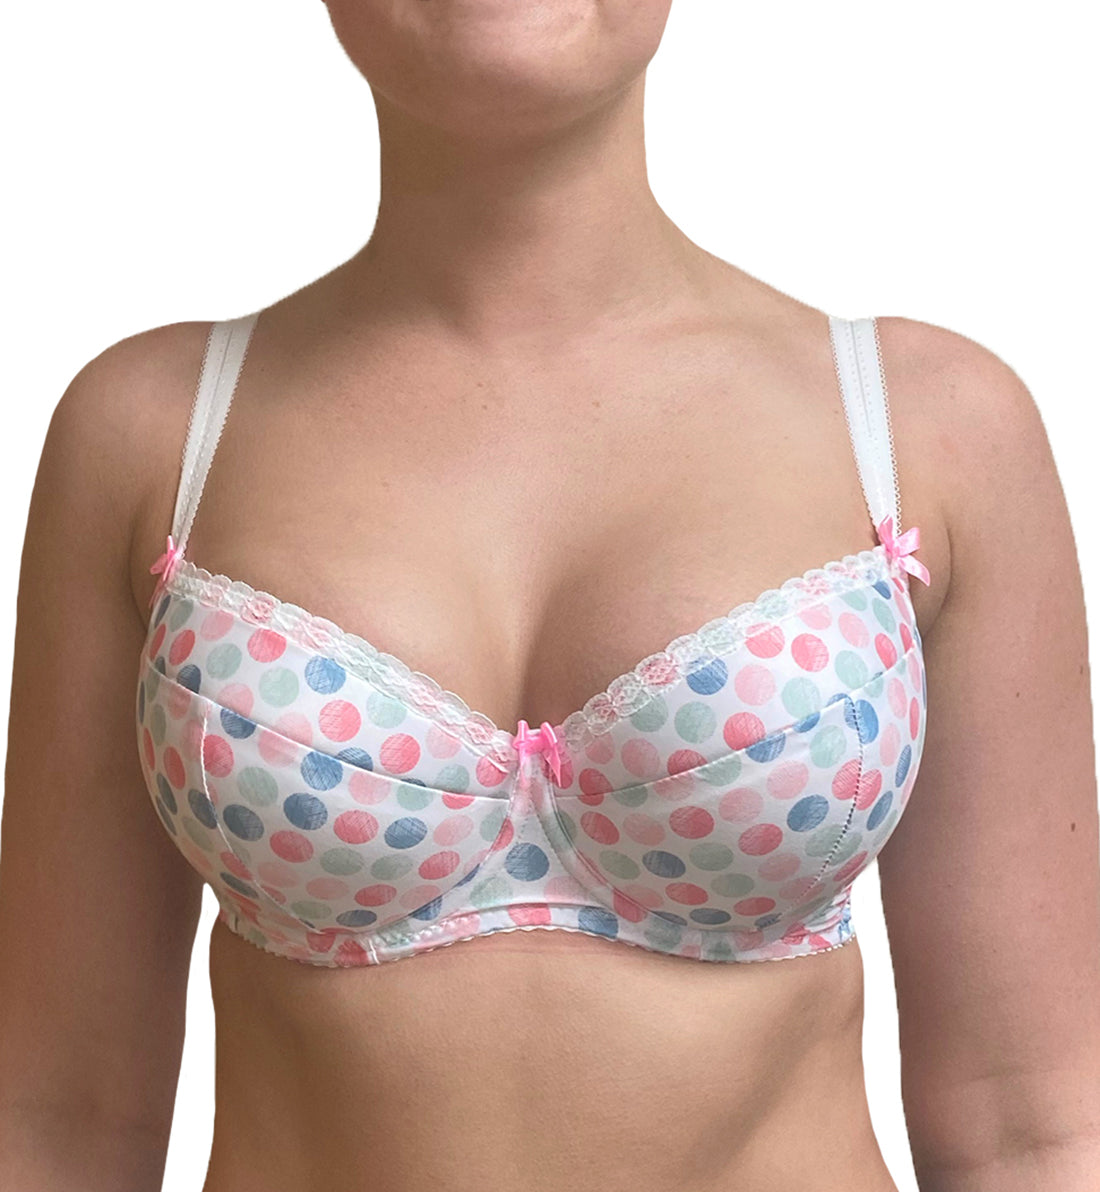 Maternity Store - The Best Nursing Bras and More